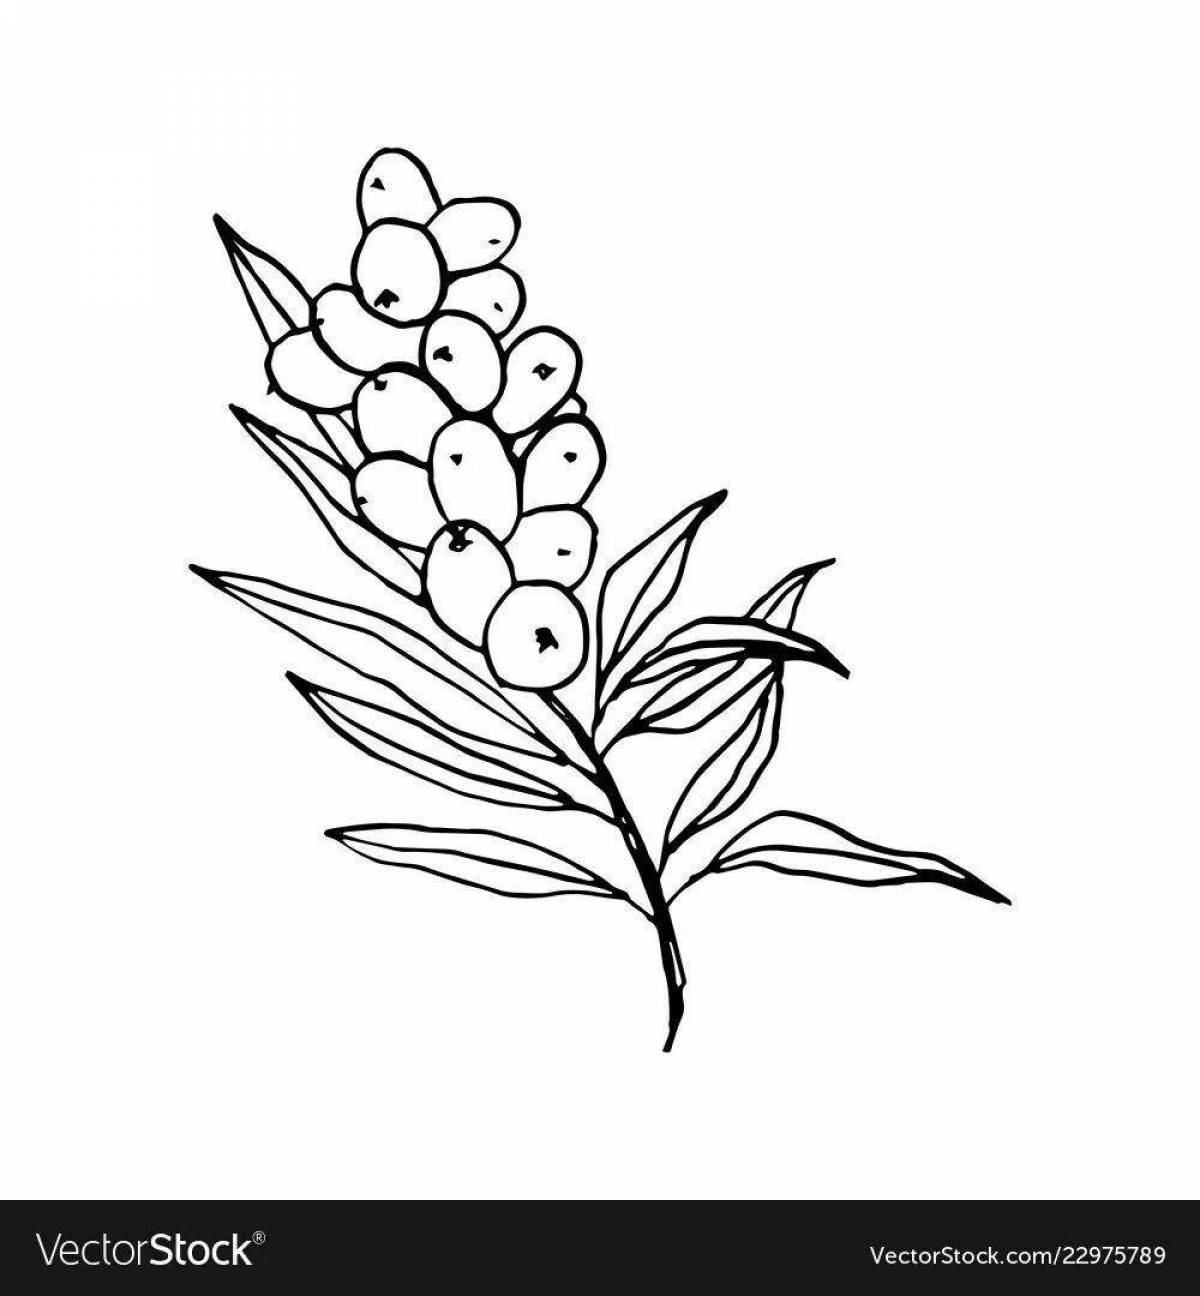 Fabulous sea buckthorn coloring page for kids